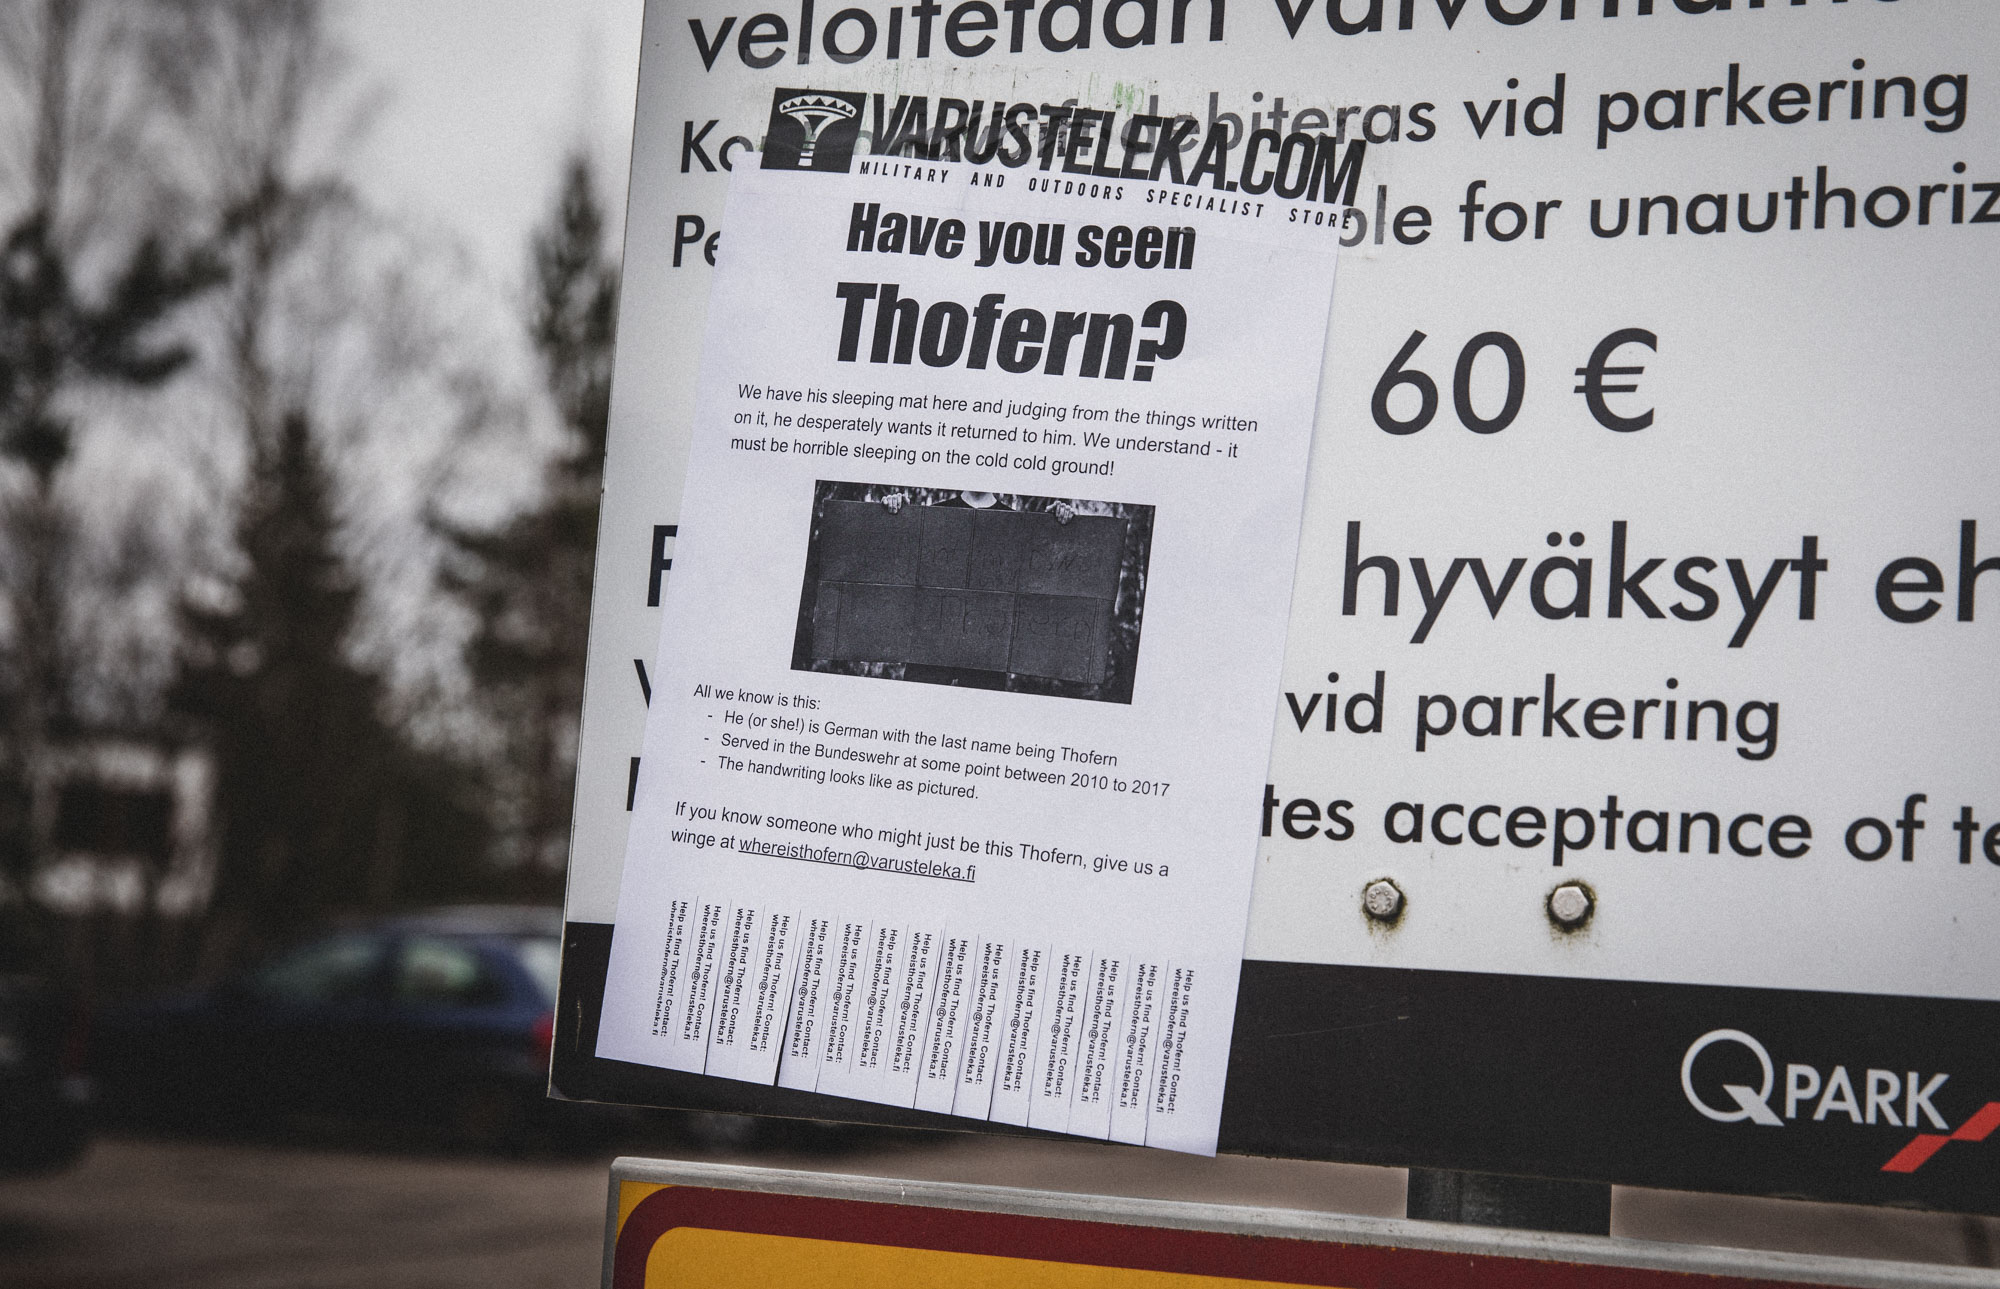 A Have you seen Thofern? ad taped onto a parking sign.